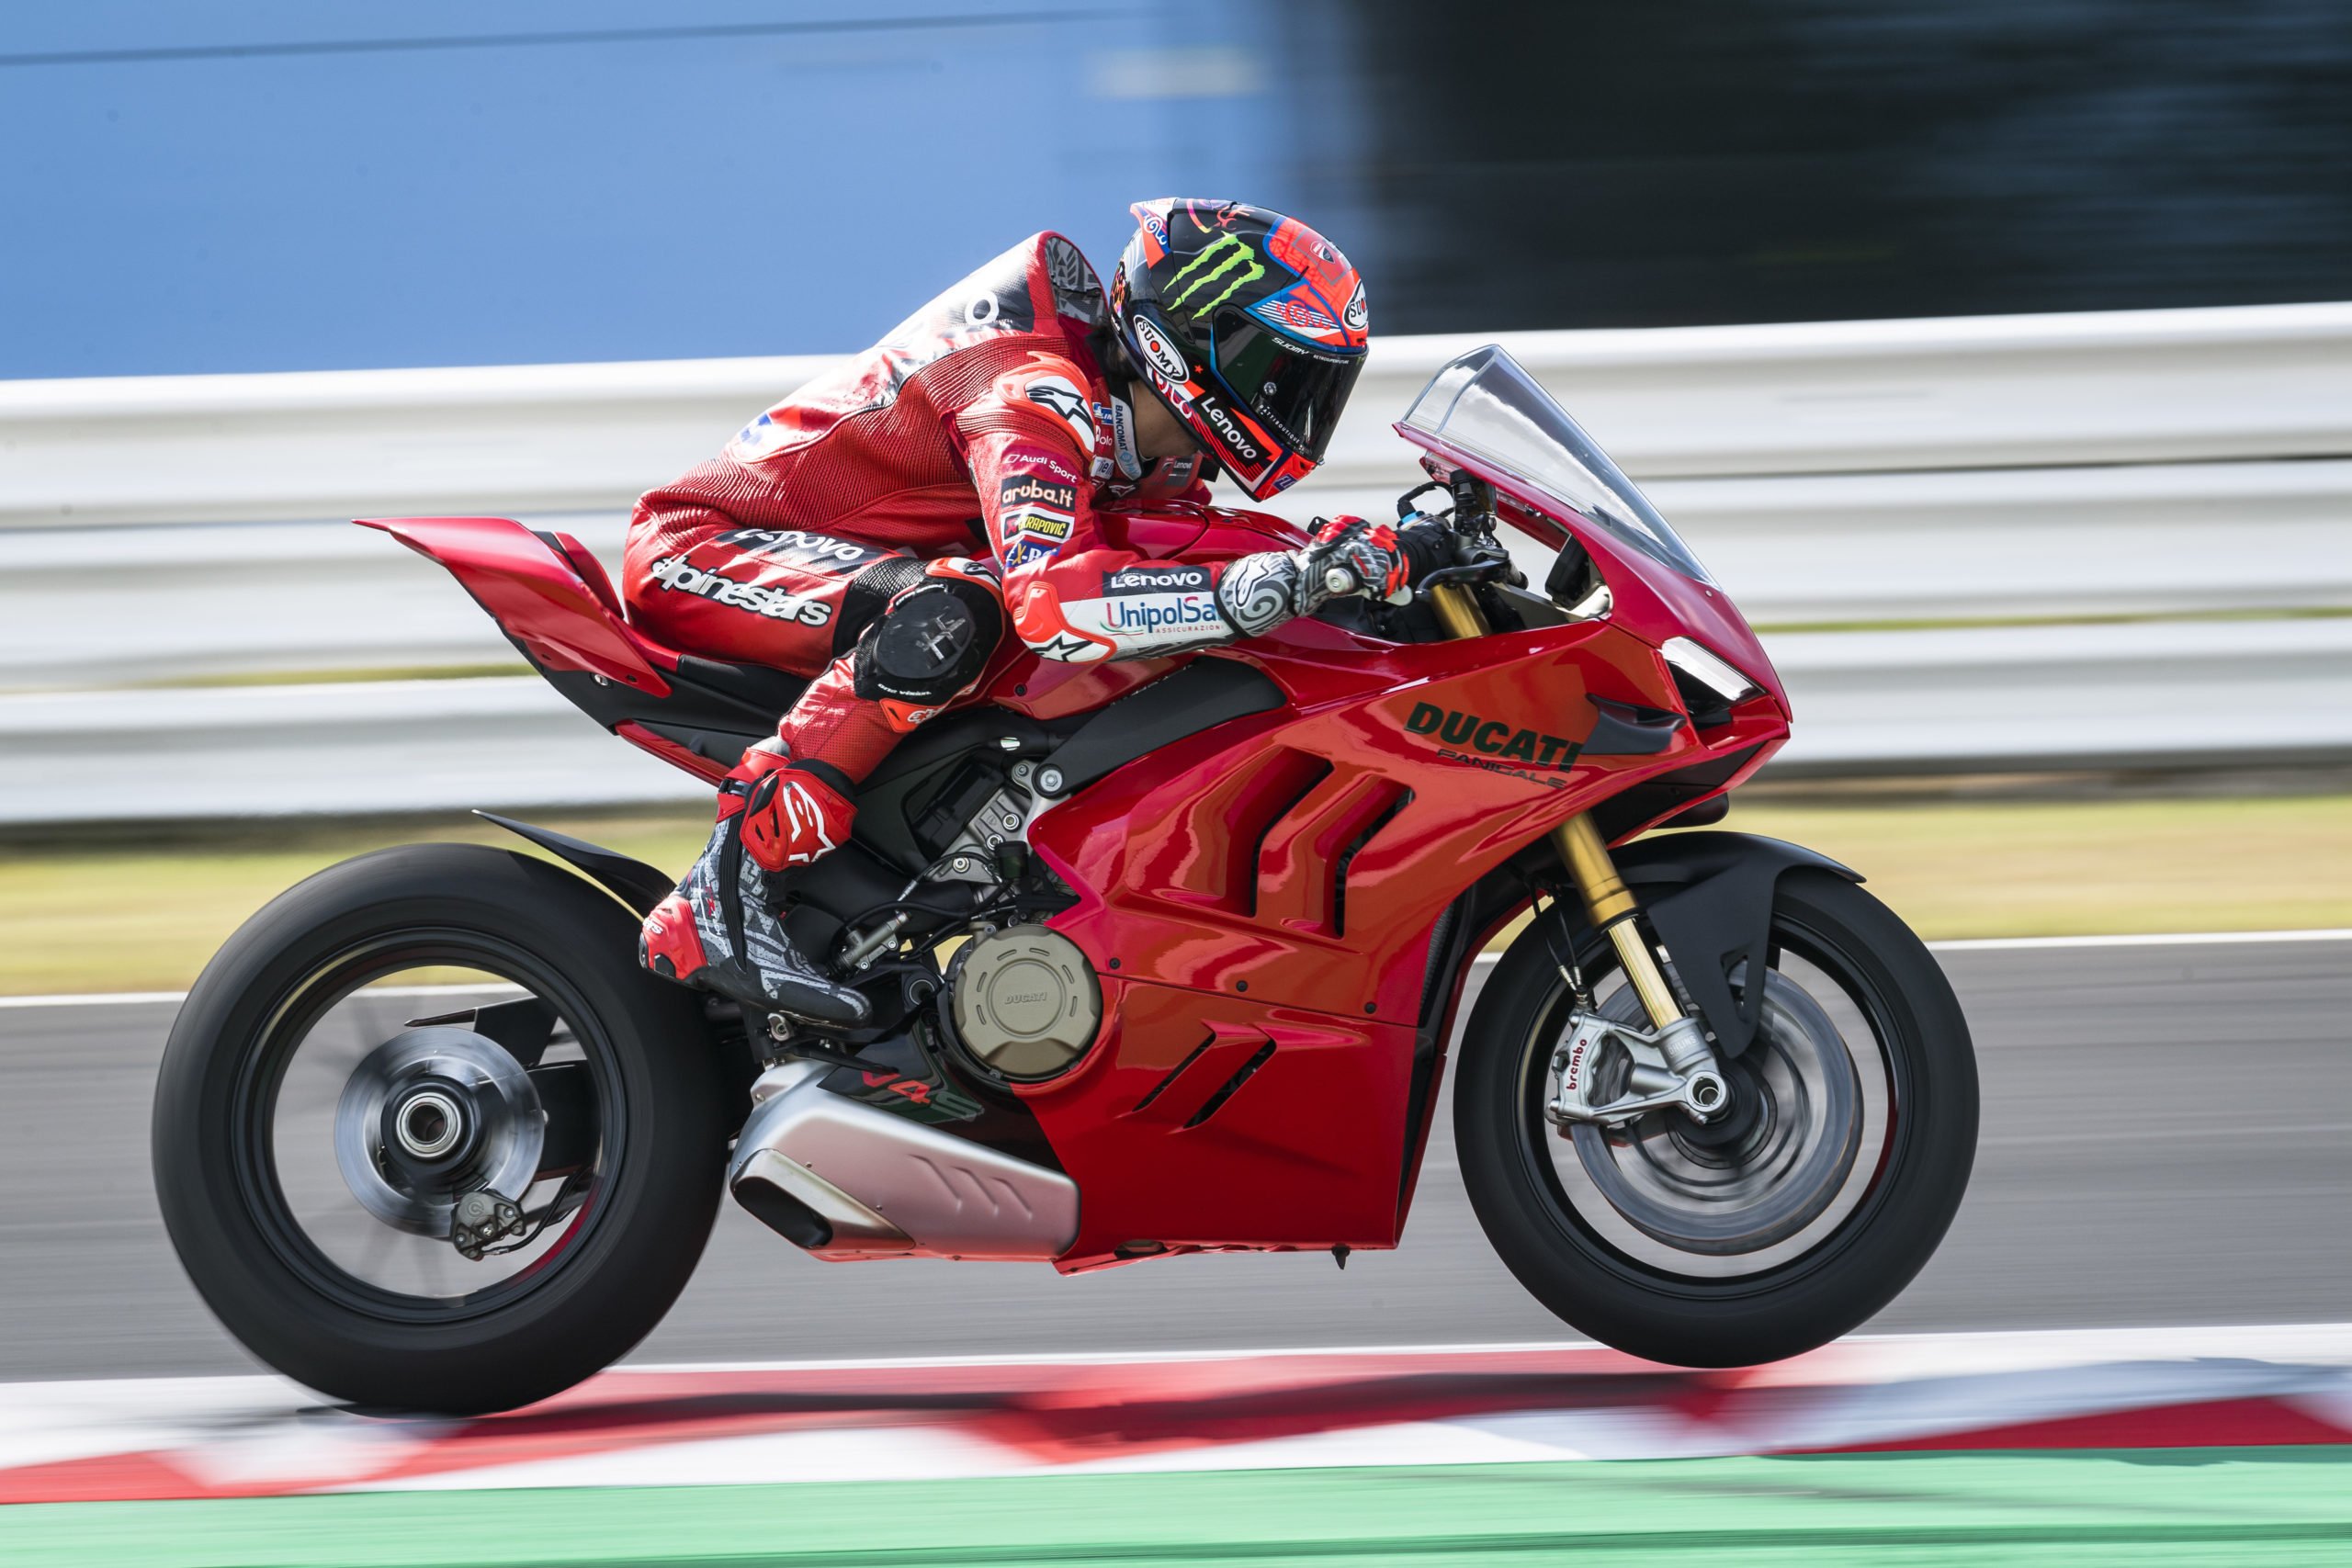 Ducati's new 2022 Panigale V4 and V4 S: A racer on a track with the Panigale with focus on the ergonomics